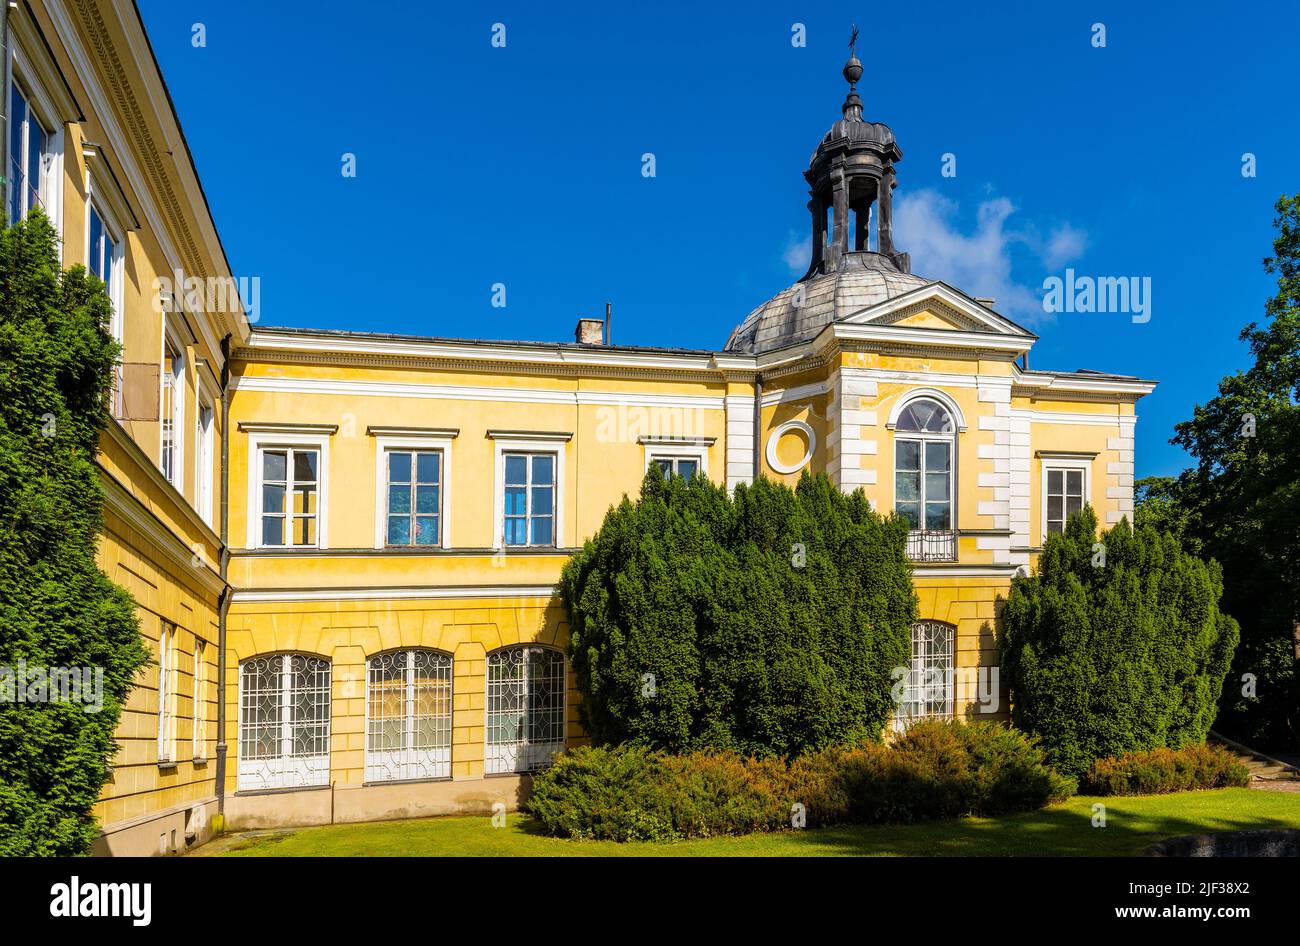 Skierniewice, Poland - June 14, 2022: XVII century chapel of Primate Palace - Palac Prymasowski - within Palace and Park historic quarter in old town Stock Photo